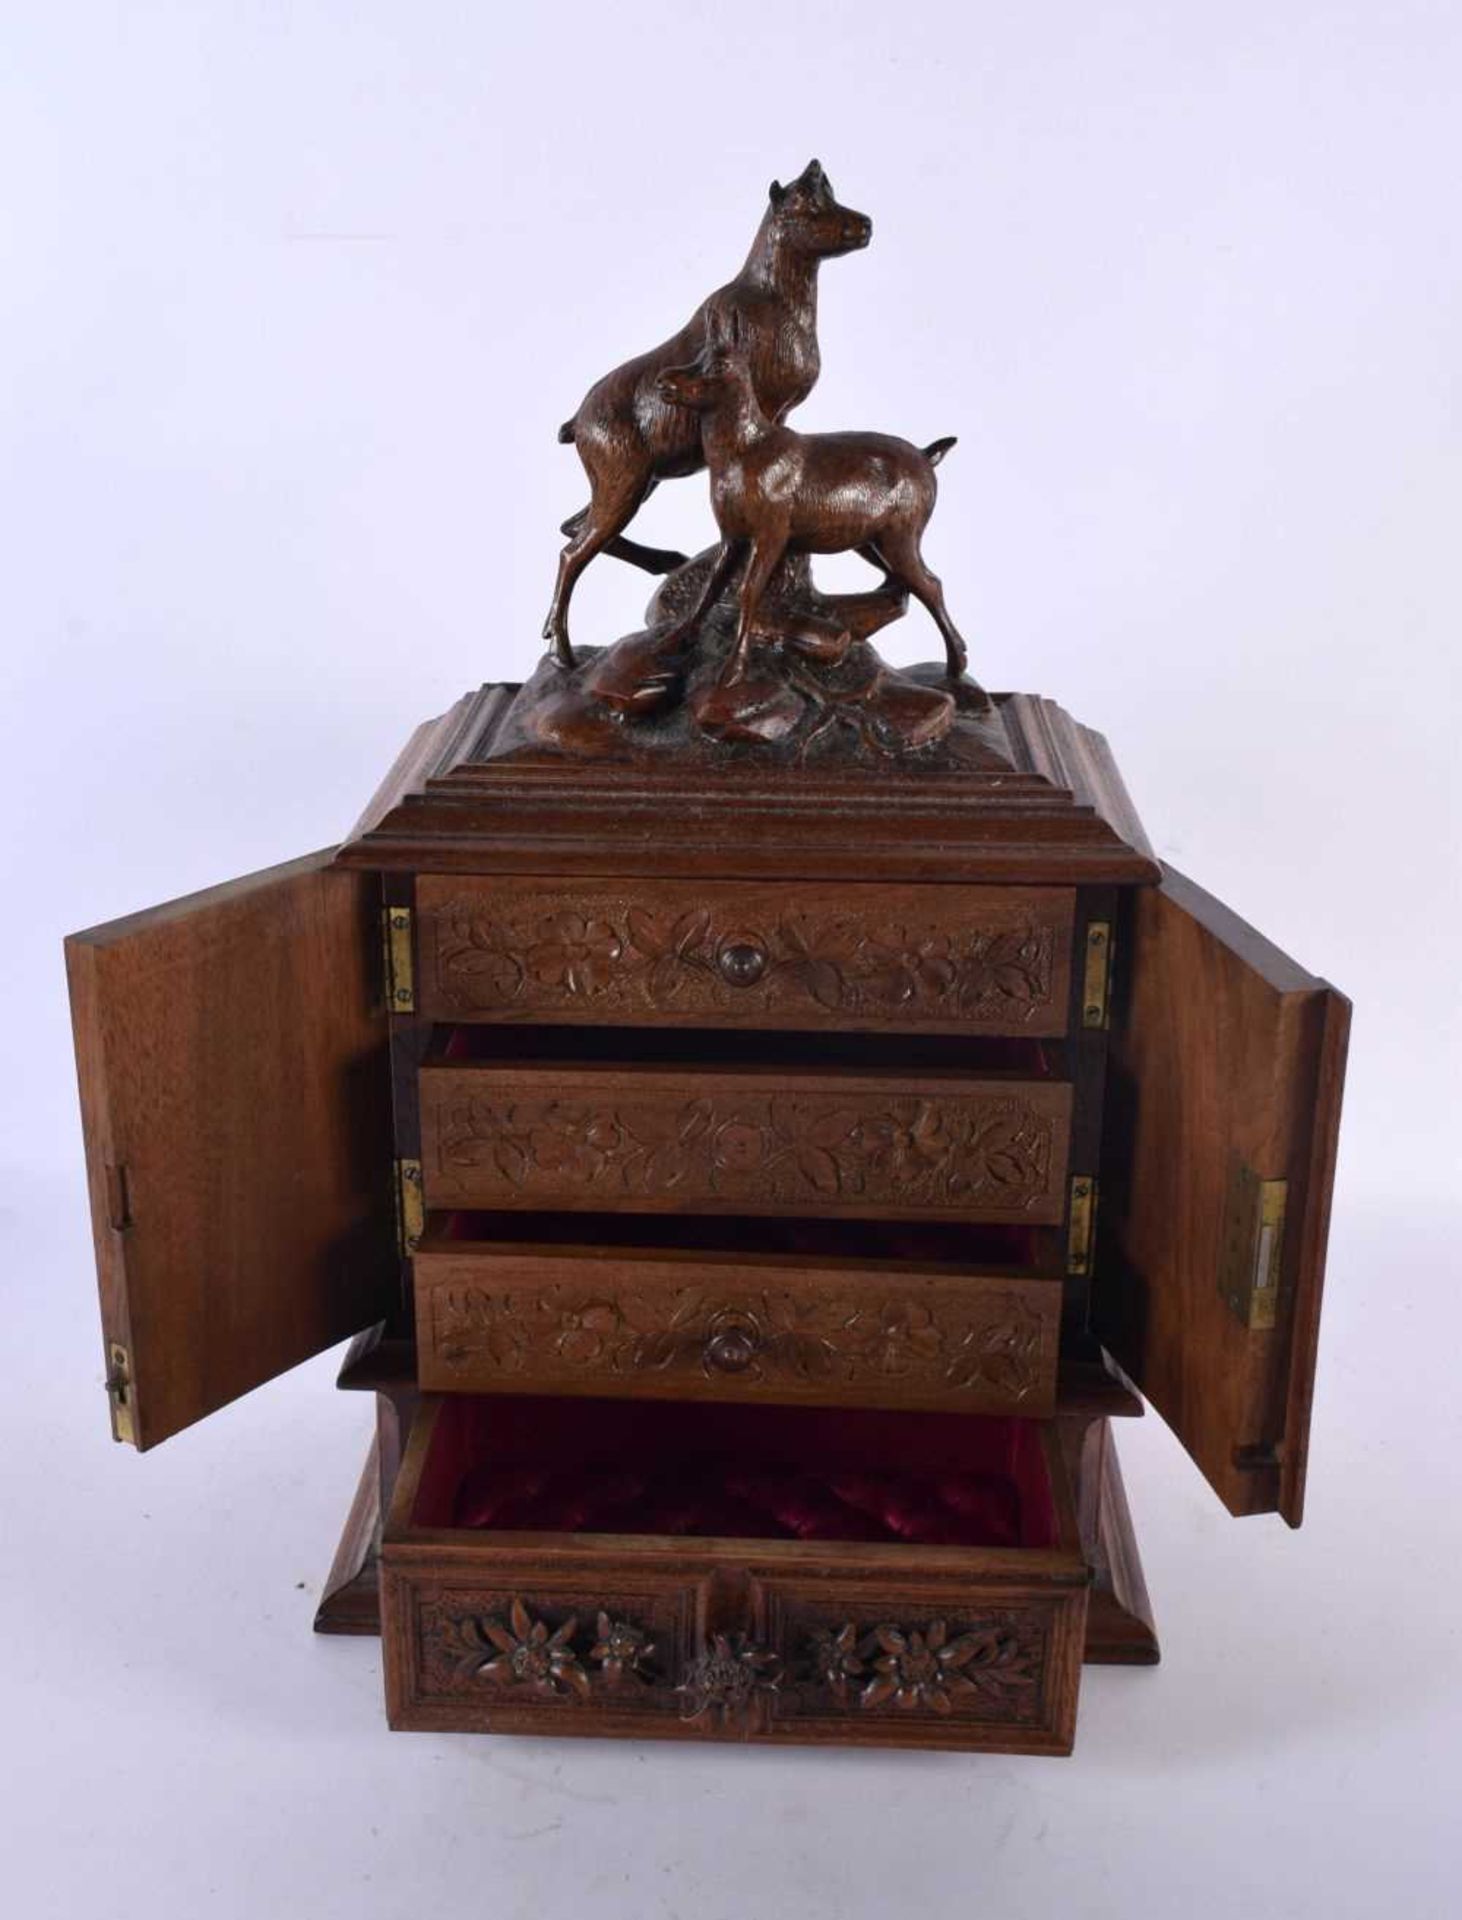 A LARGE 19TH CENTURY BAVARIAN BLACK FOREST CARVED WOOD JEWELLERY CABINET formed with two ibex. 40 cm - Image 2 of 5